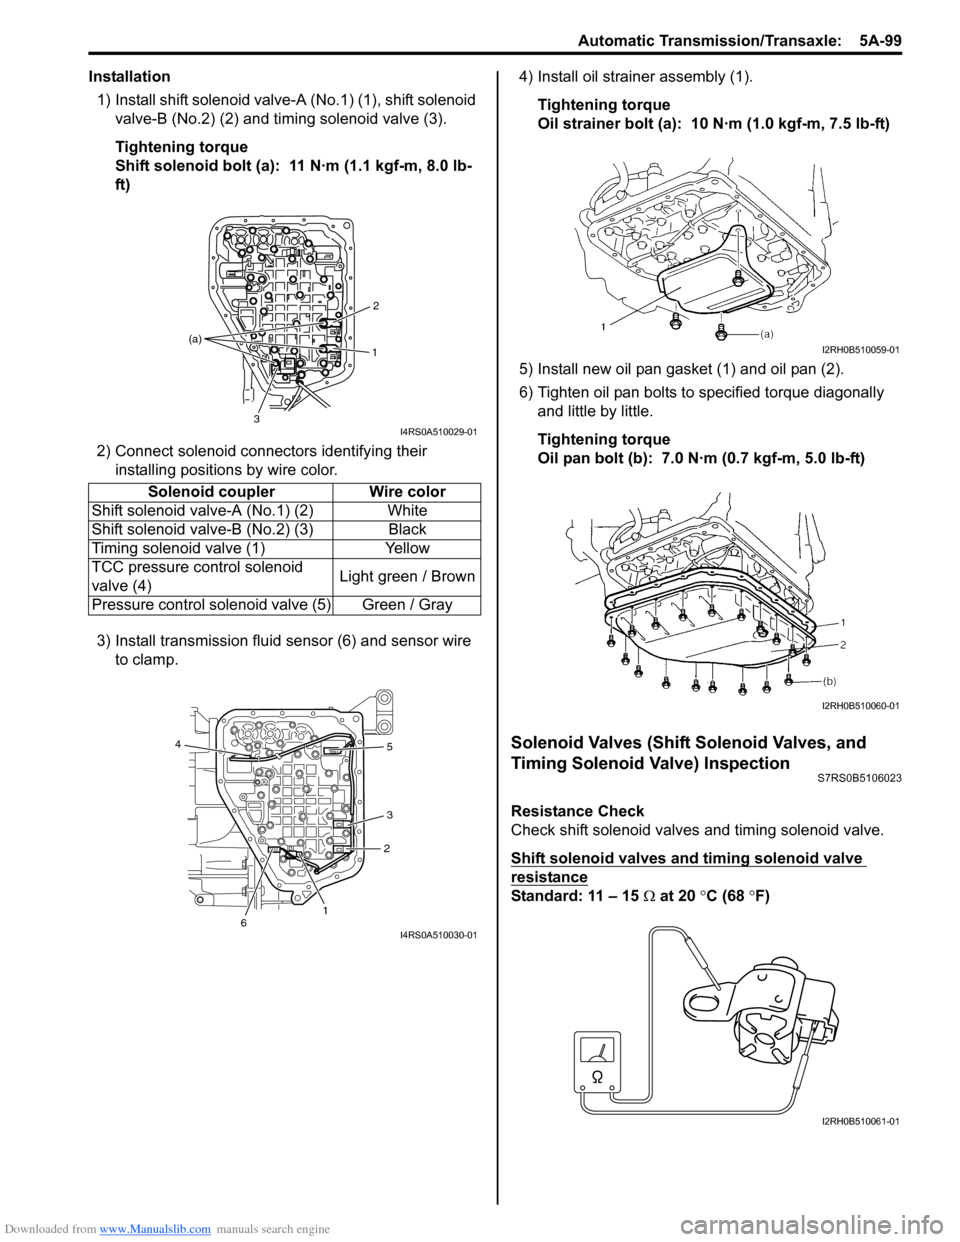 SUZUKI SWIFT 2006 2.G Service Repair Manual Downloaded from www.Manualslib.com manuals search engine Automatic Transmission/Transaxle:  5A-99
Installation1) Install shift solenoid valve- A (No.1) (1), shift solenoid 
valve-B (No.2) (2) and timi